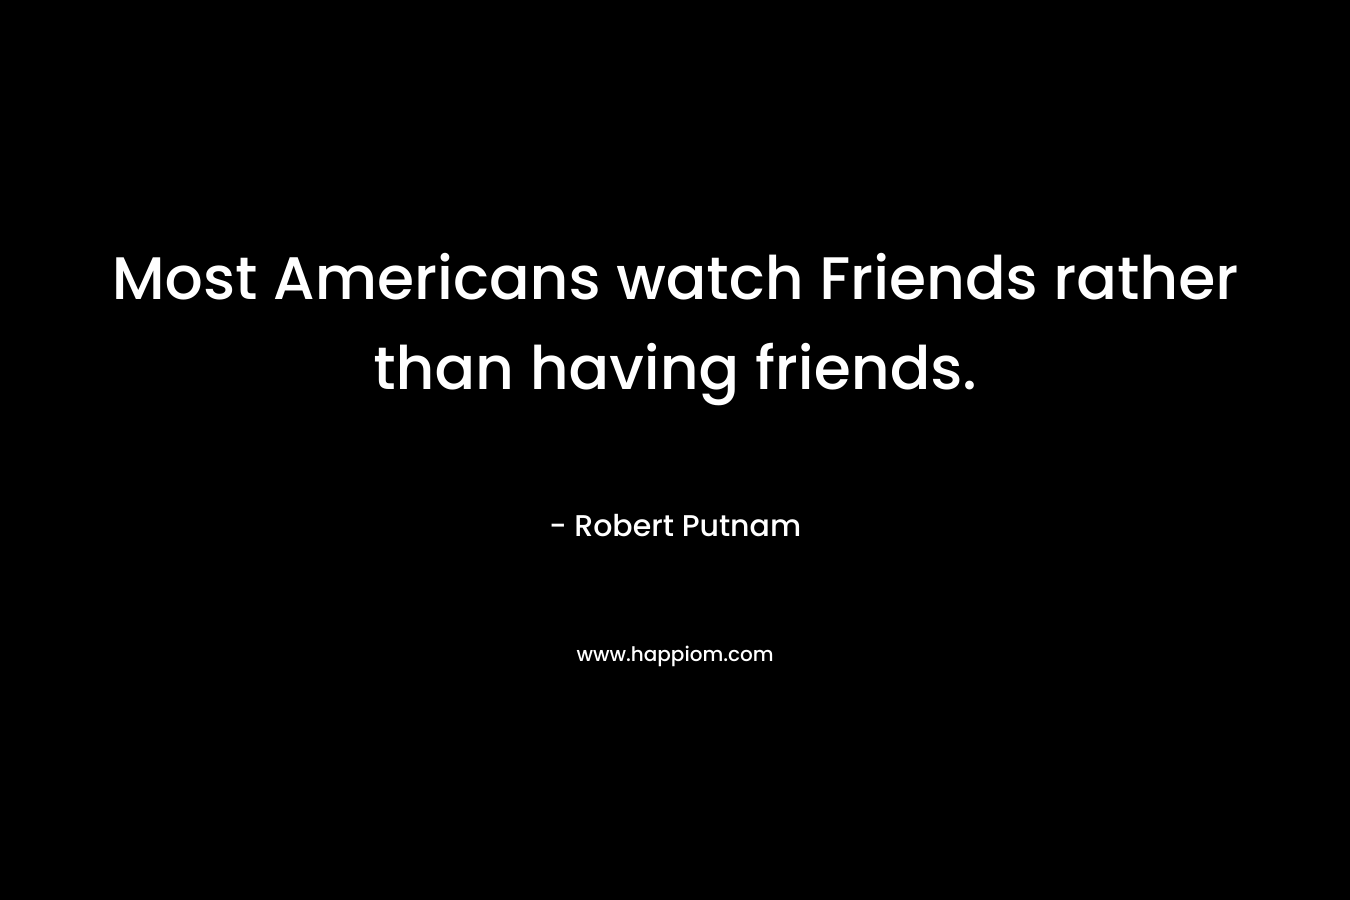 Most Americans watch Friends rather than having friends.